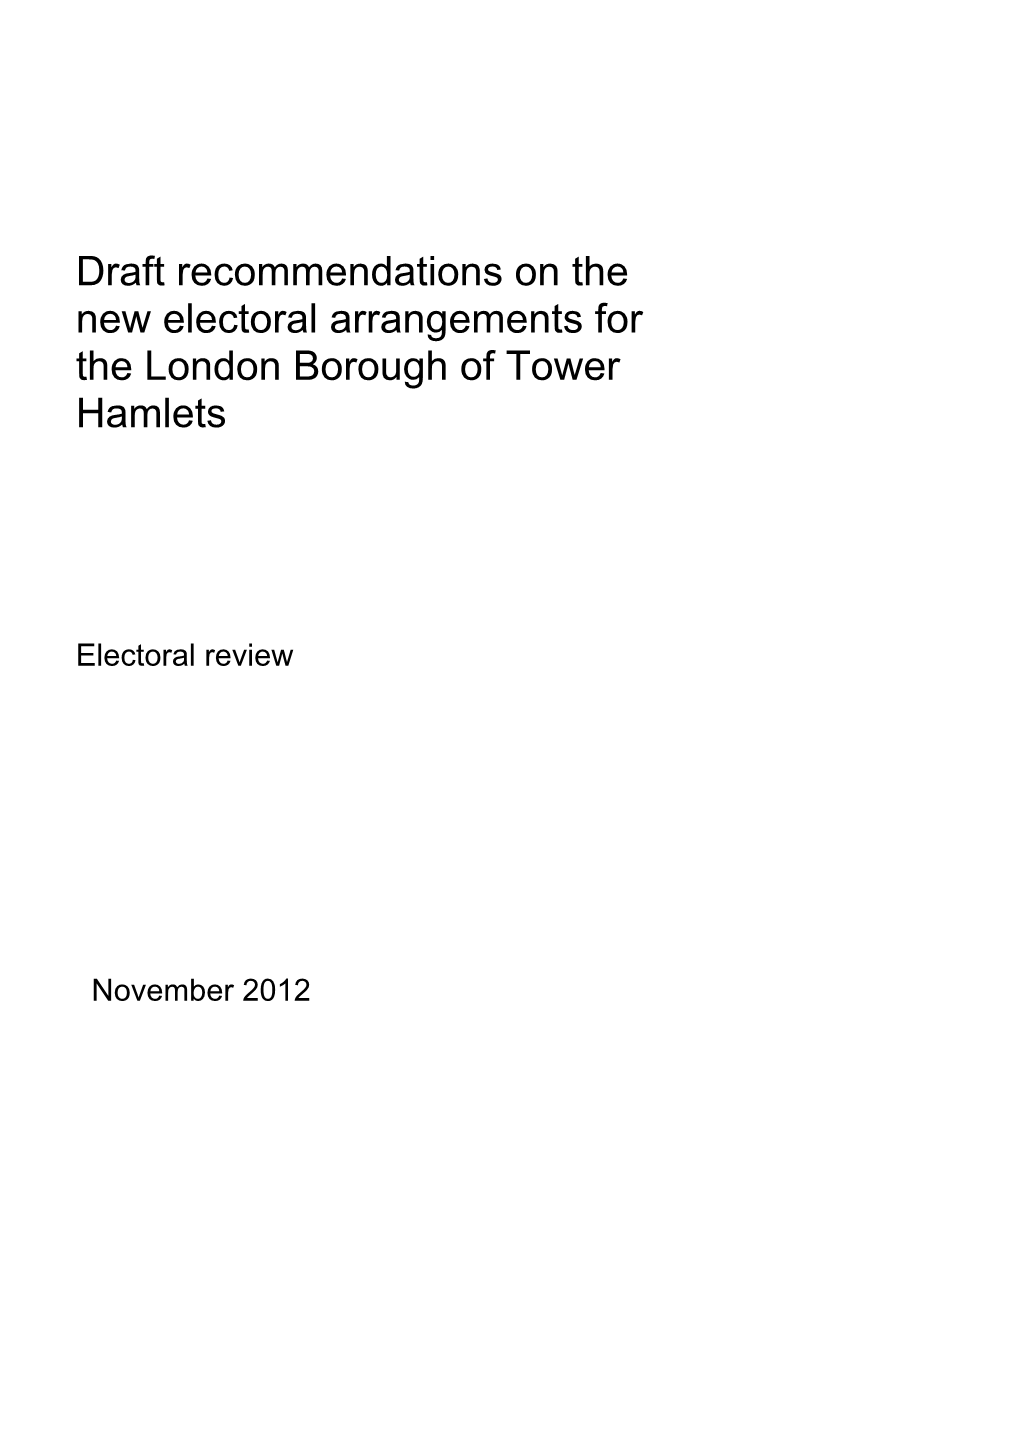 Draft Recommendations on the New Electoral Arrangements for the London Borough of Tower Hamlets